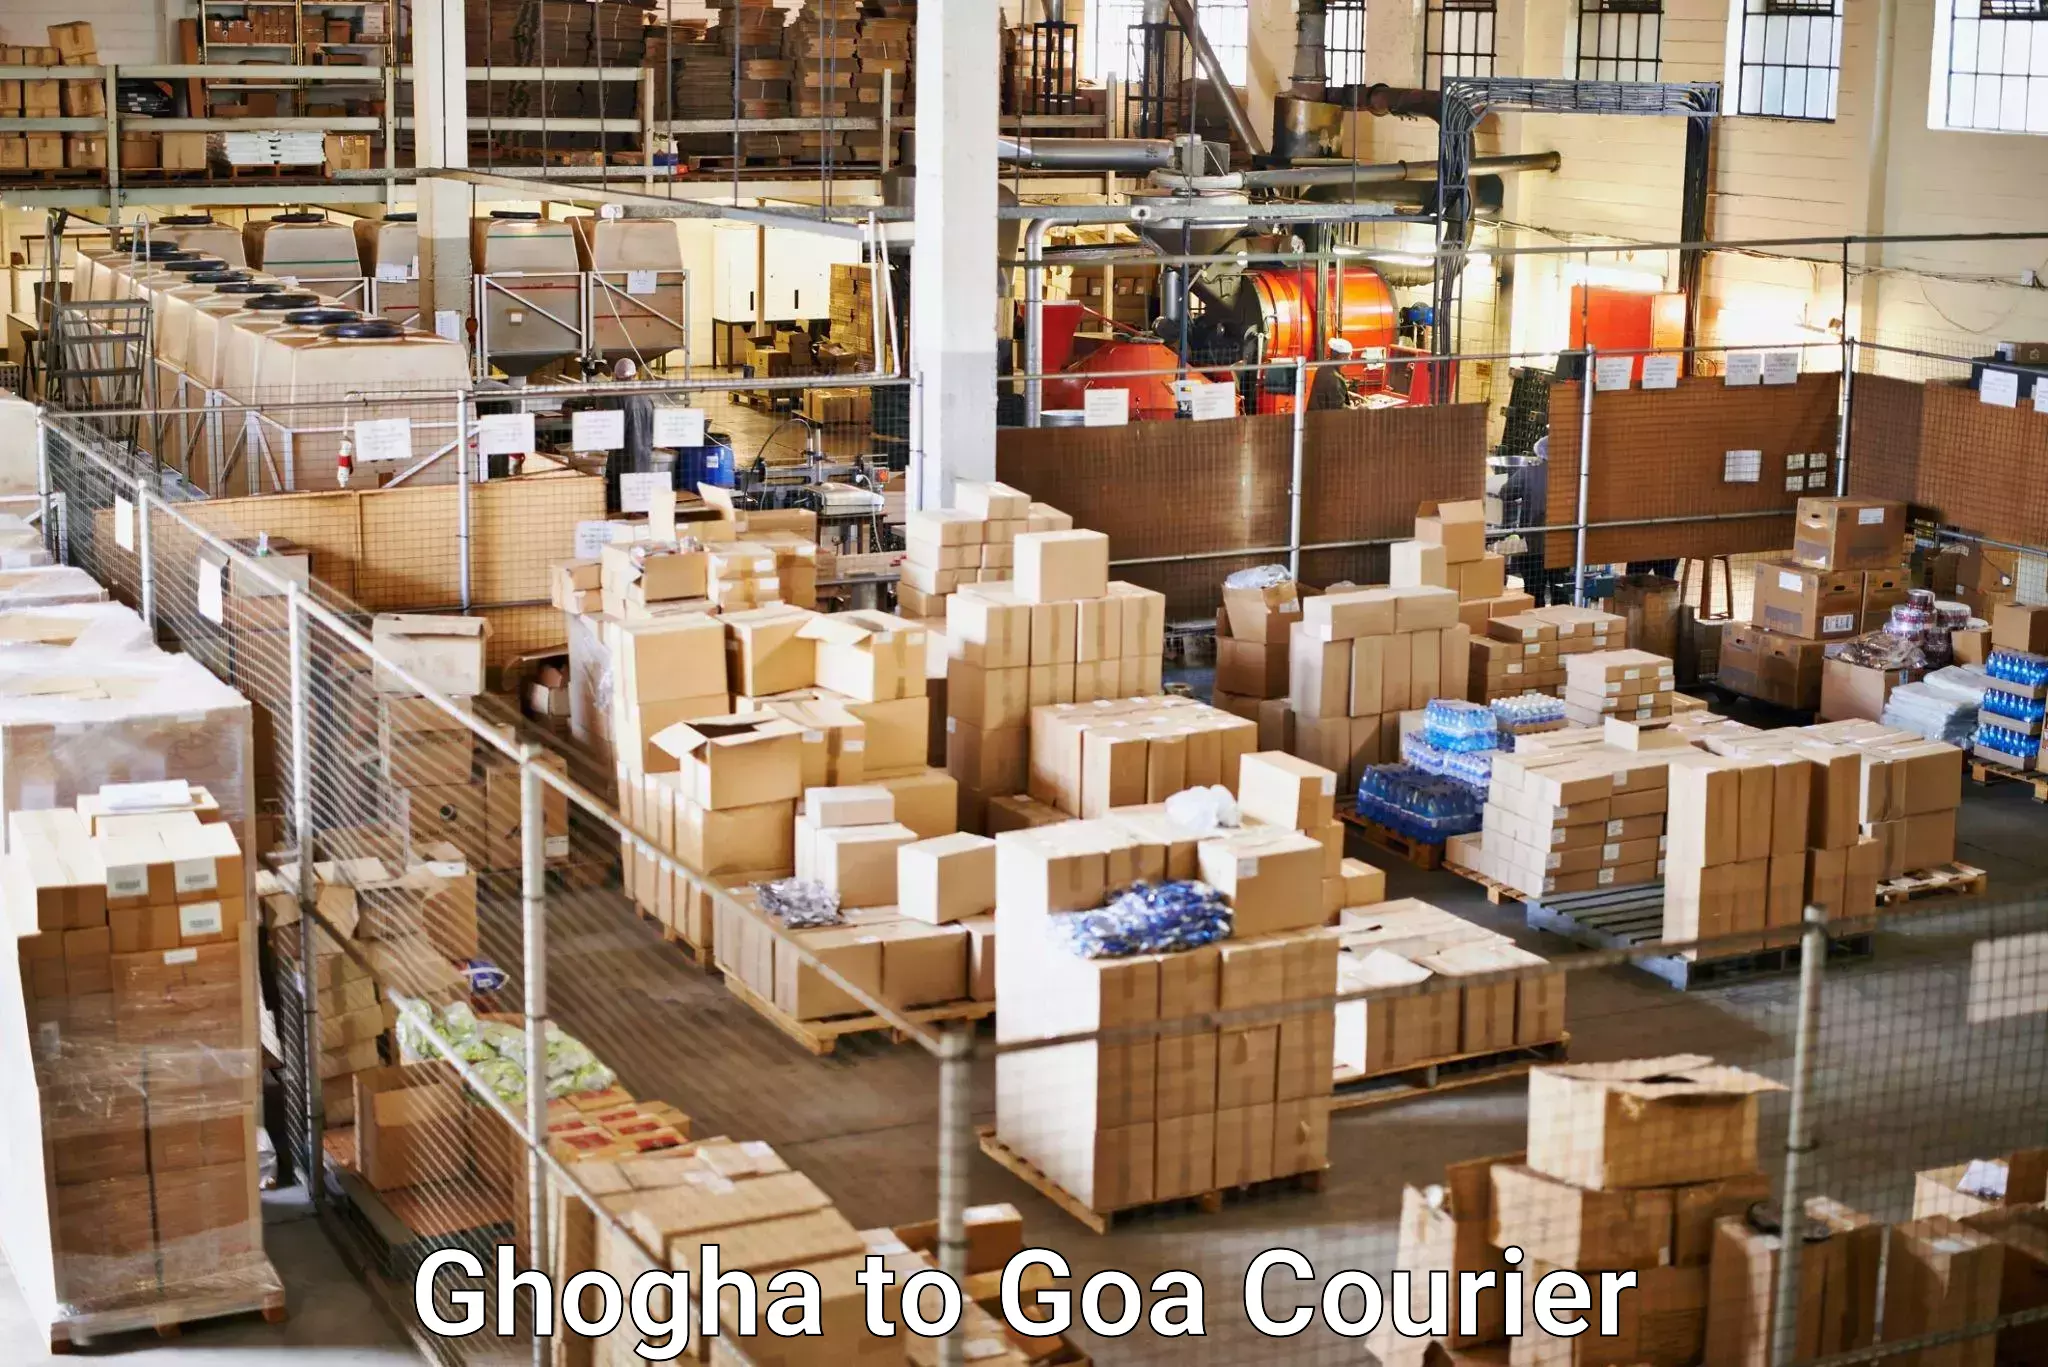 On-call courier service Ghogha to Goa